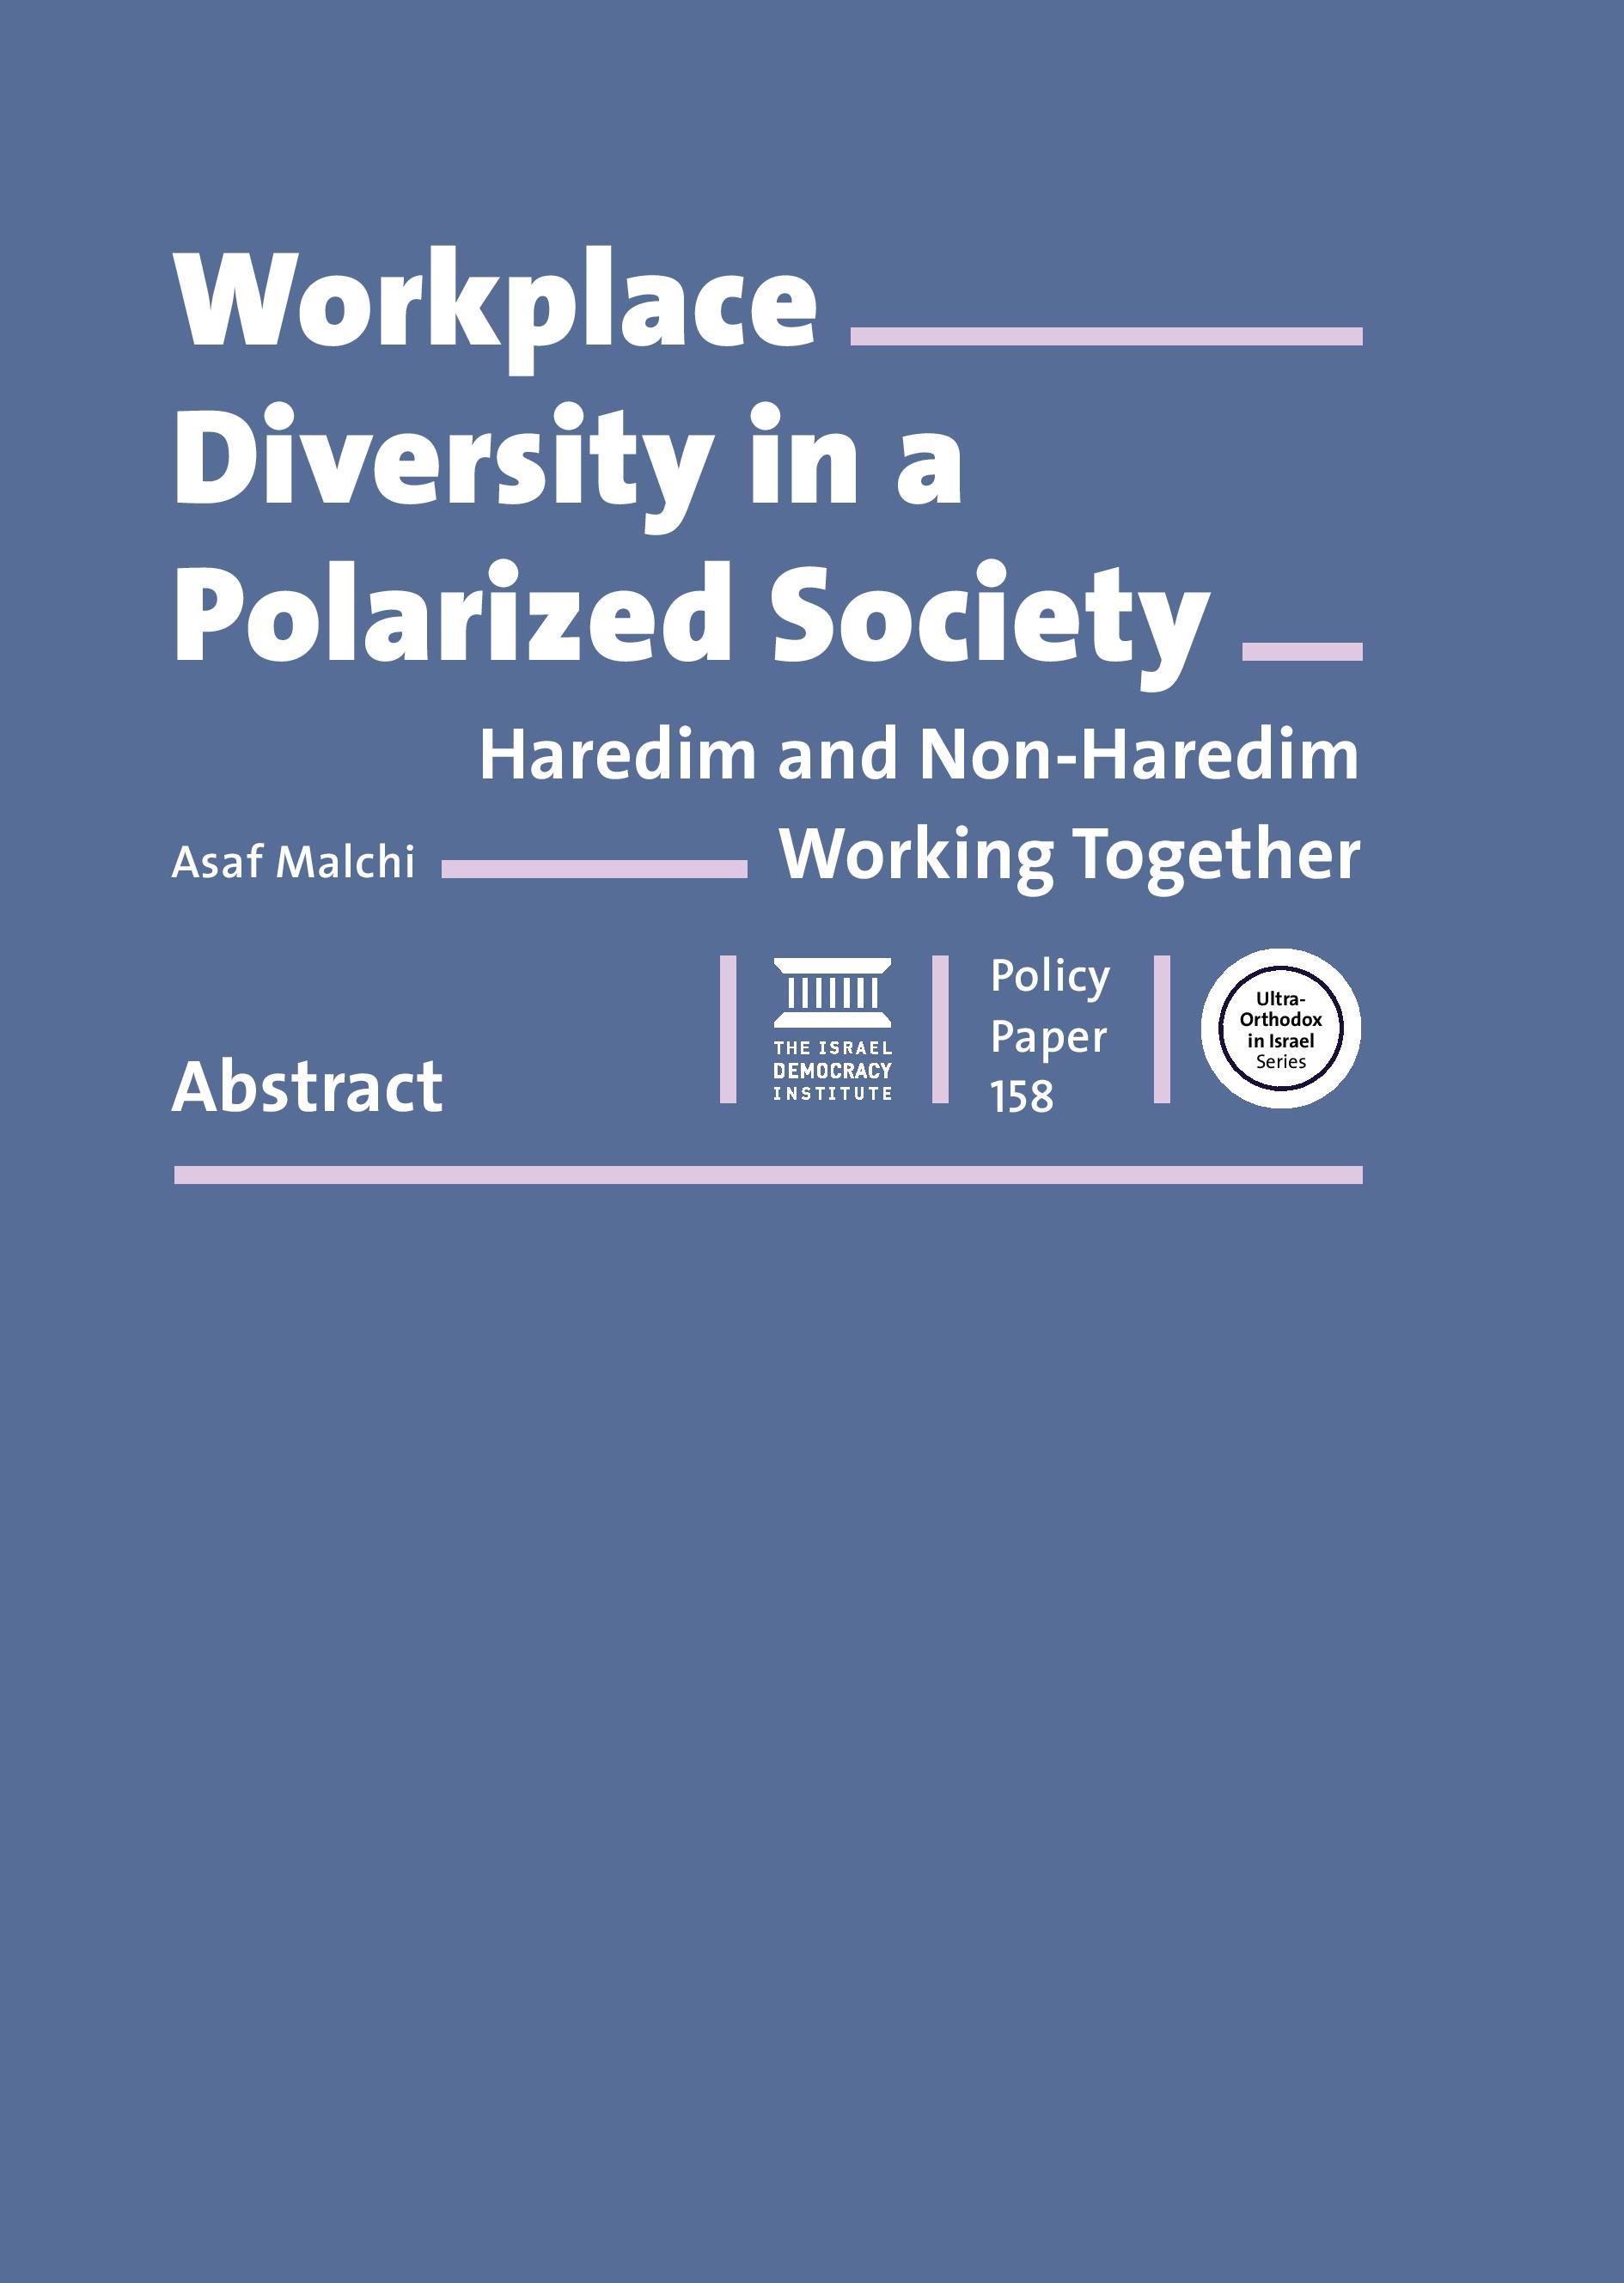 Workplace Diversity in a Polarized Society: Haredim and Non-Haredim Working Together